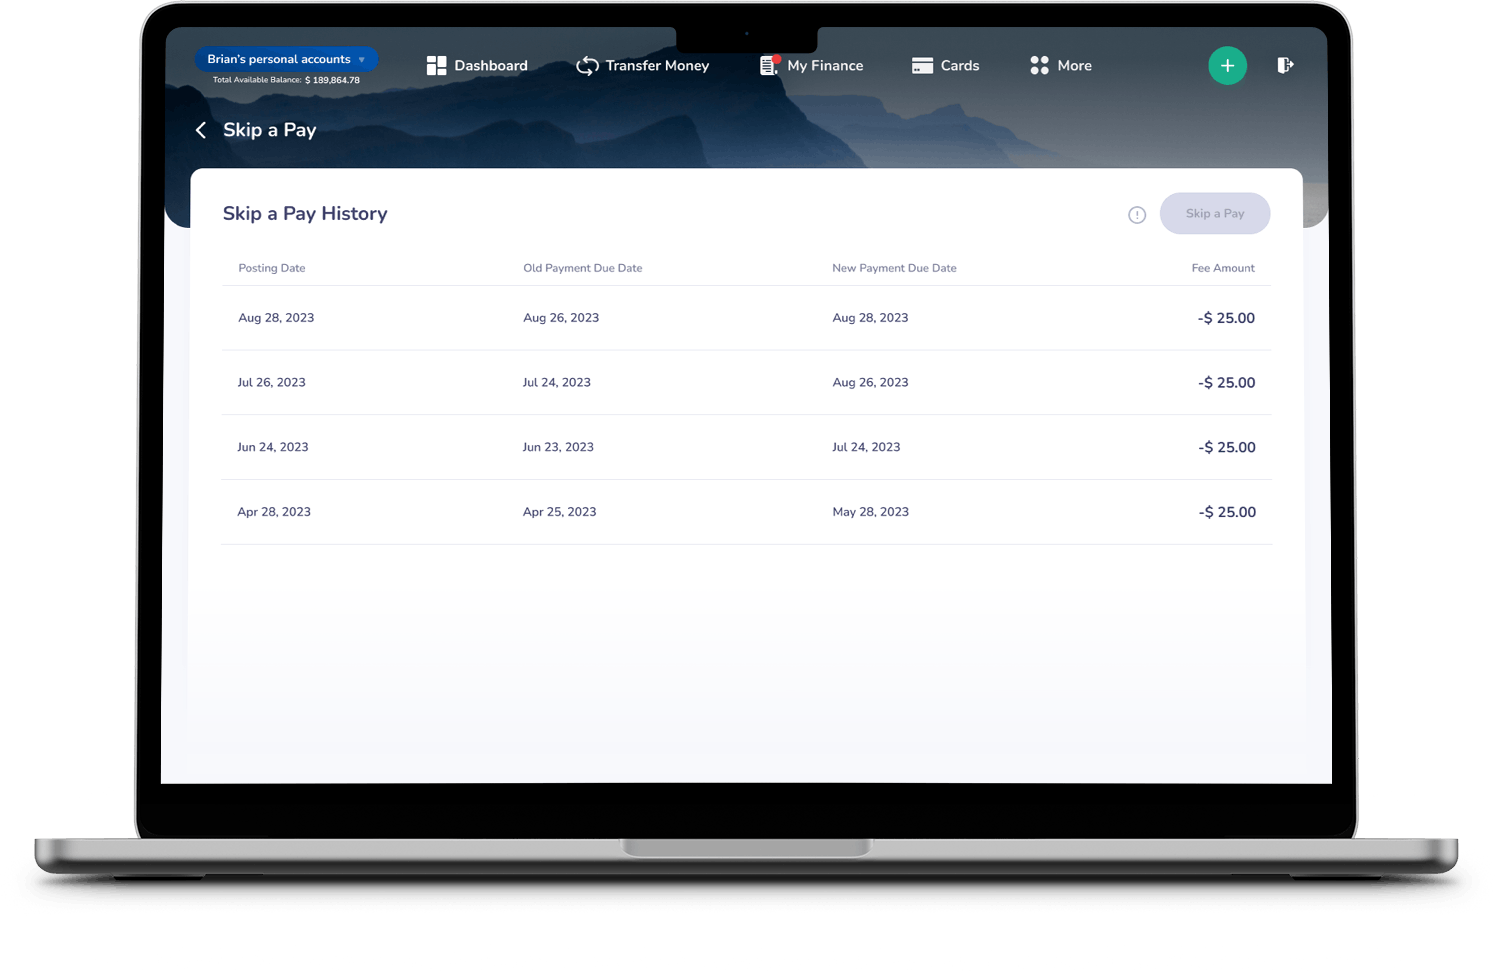 Screenshot of Bankjoy's "Skip a Pay" feature